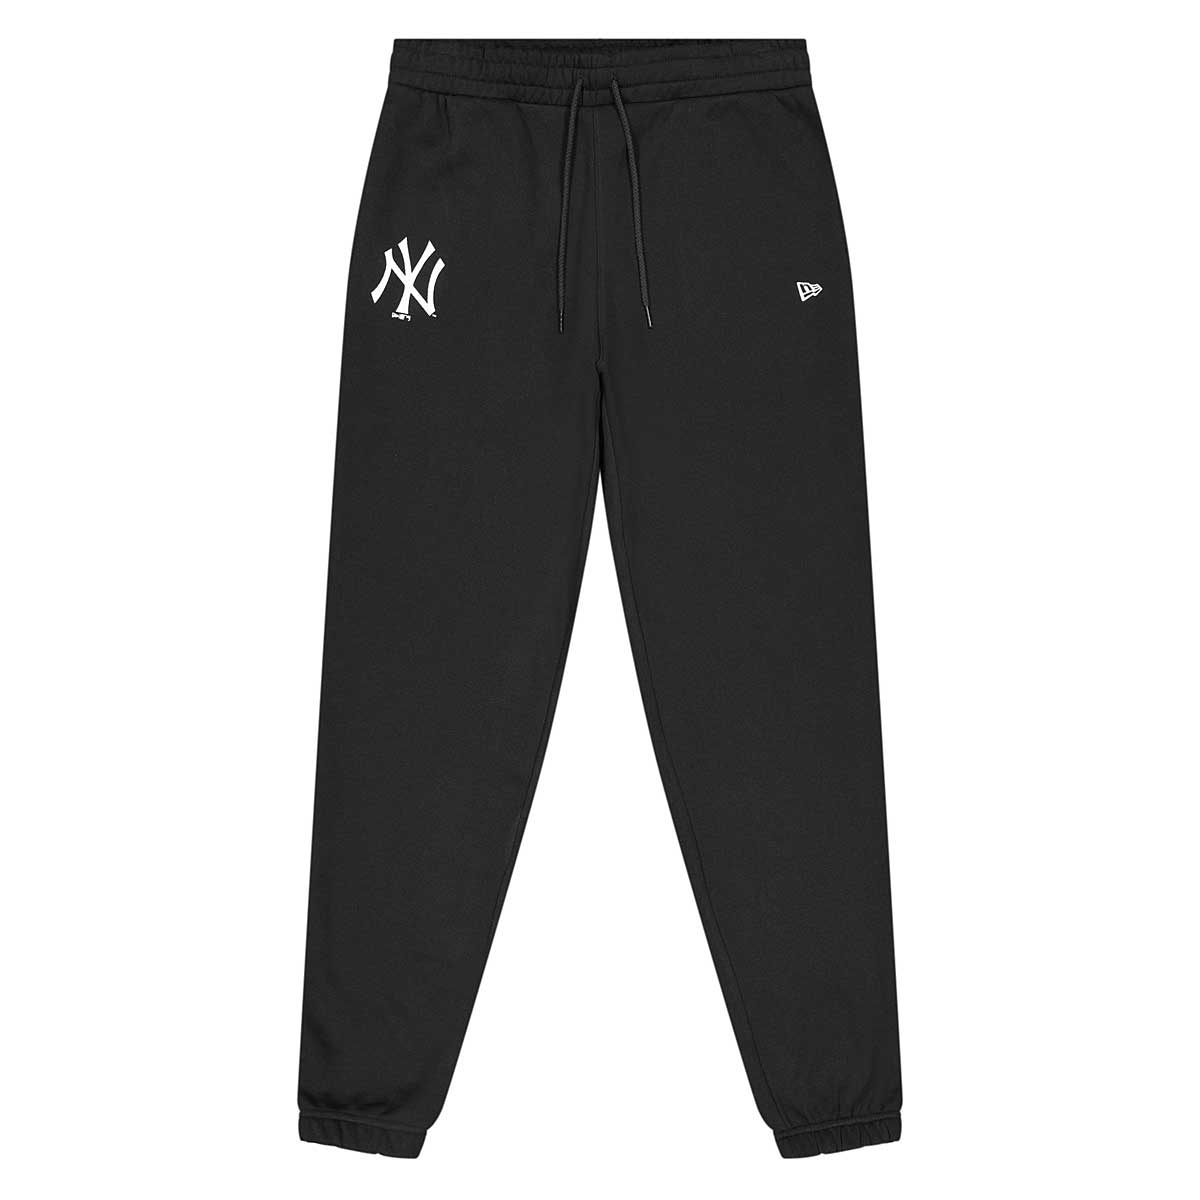 Buy MLB NEW YORK YANKEES LEAGUE ESSENTIAL JOGGER PANTS for N/A 0.0 on ...